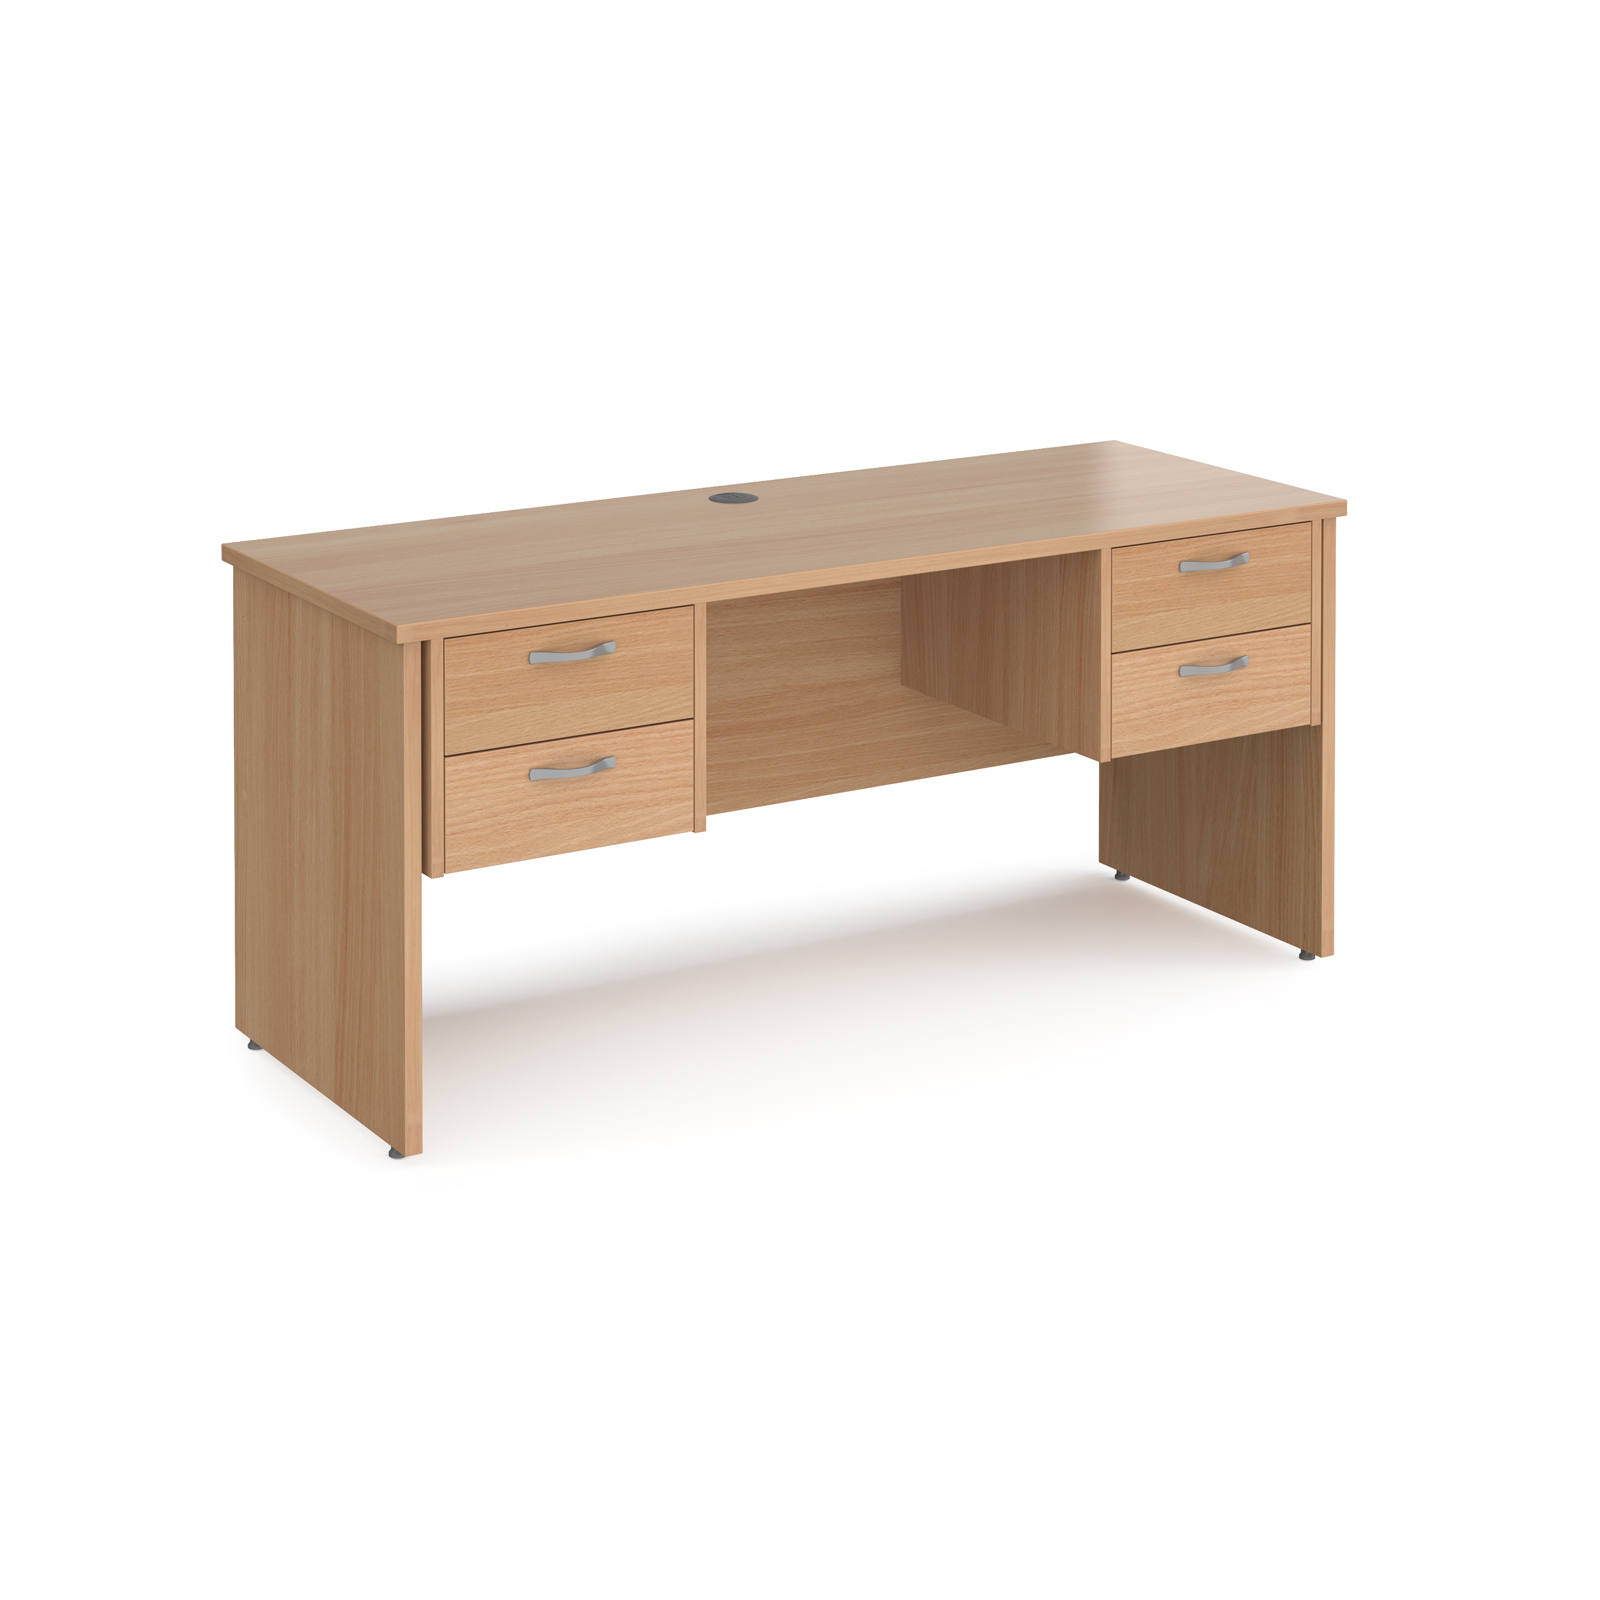 Maestro 25 straight desk 1600mm x 600mm with two x 2 drawer pedestals - beech top with panel end leg